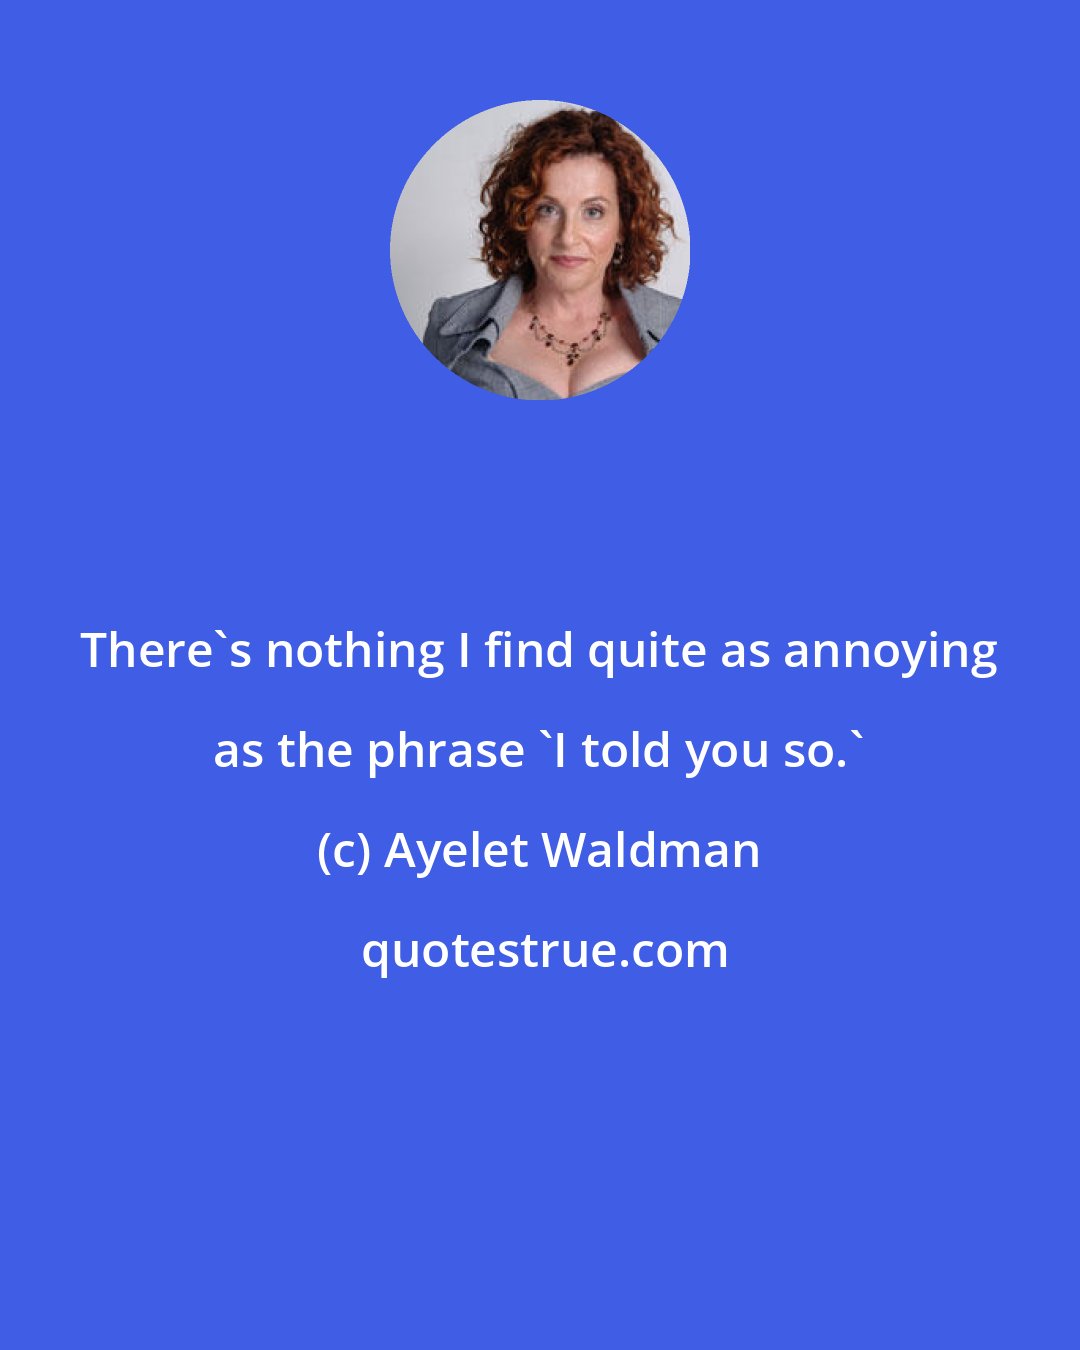 Ayelet Waldman: There's nothing I find quite as annoying as the phrase 'I told you so.'